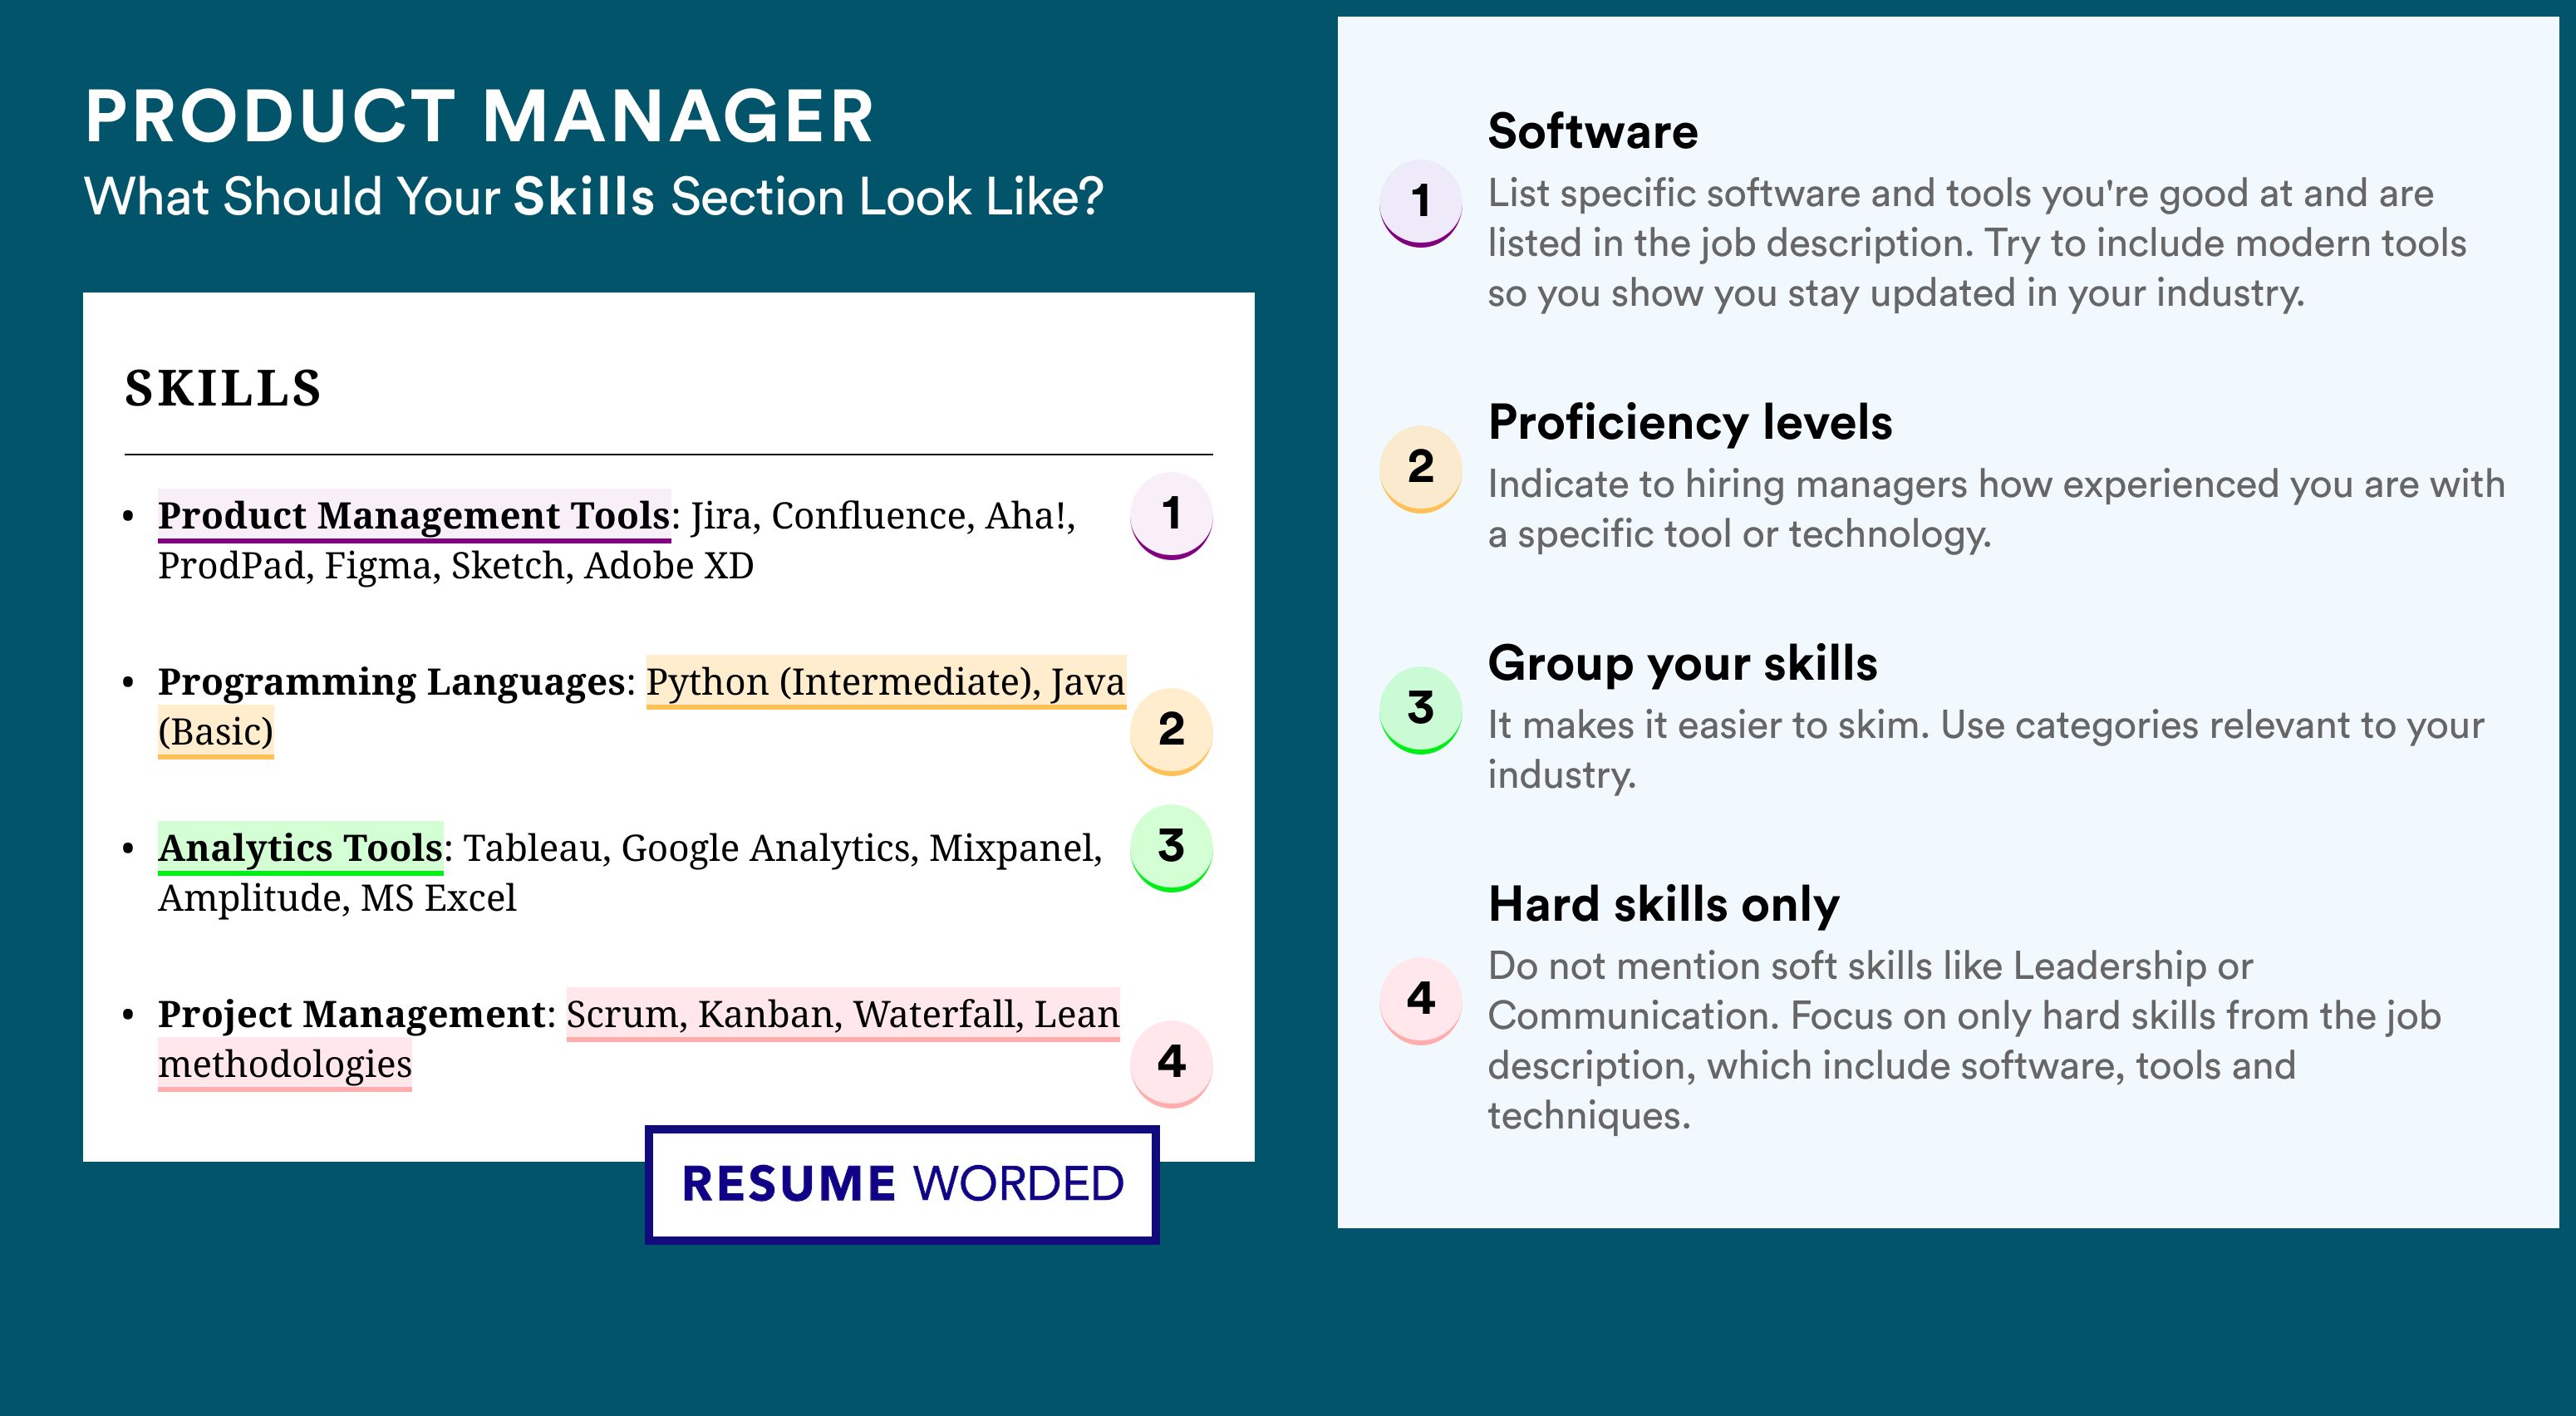 How To Write Your Skills Section - Product Manager Roles